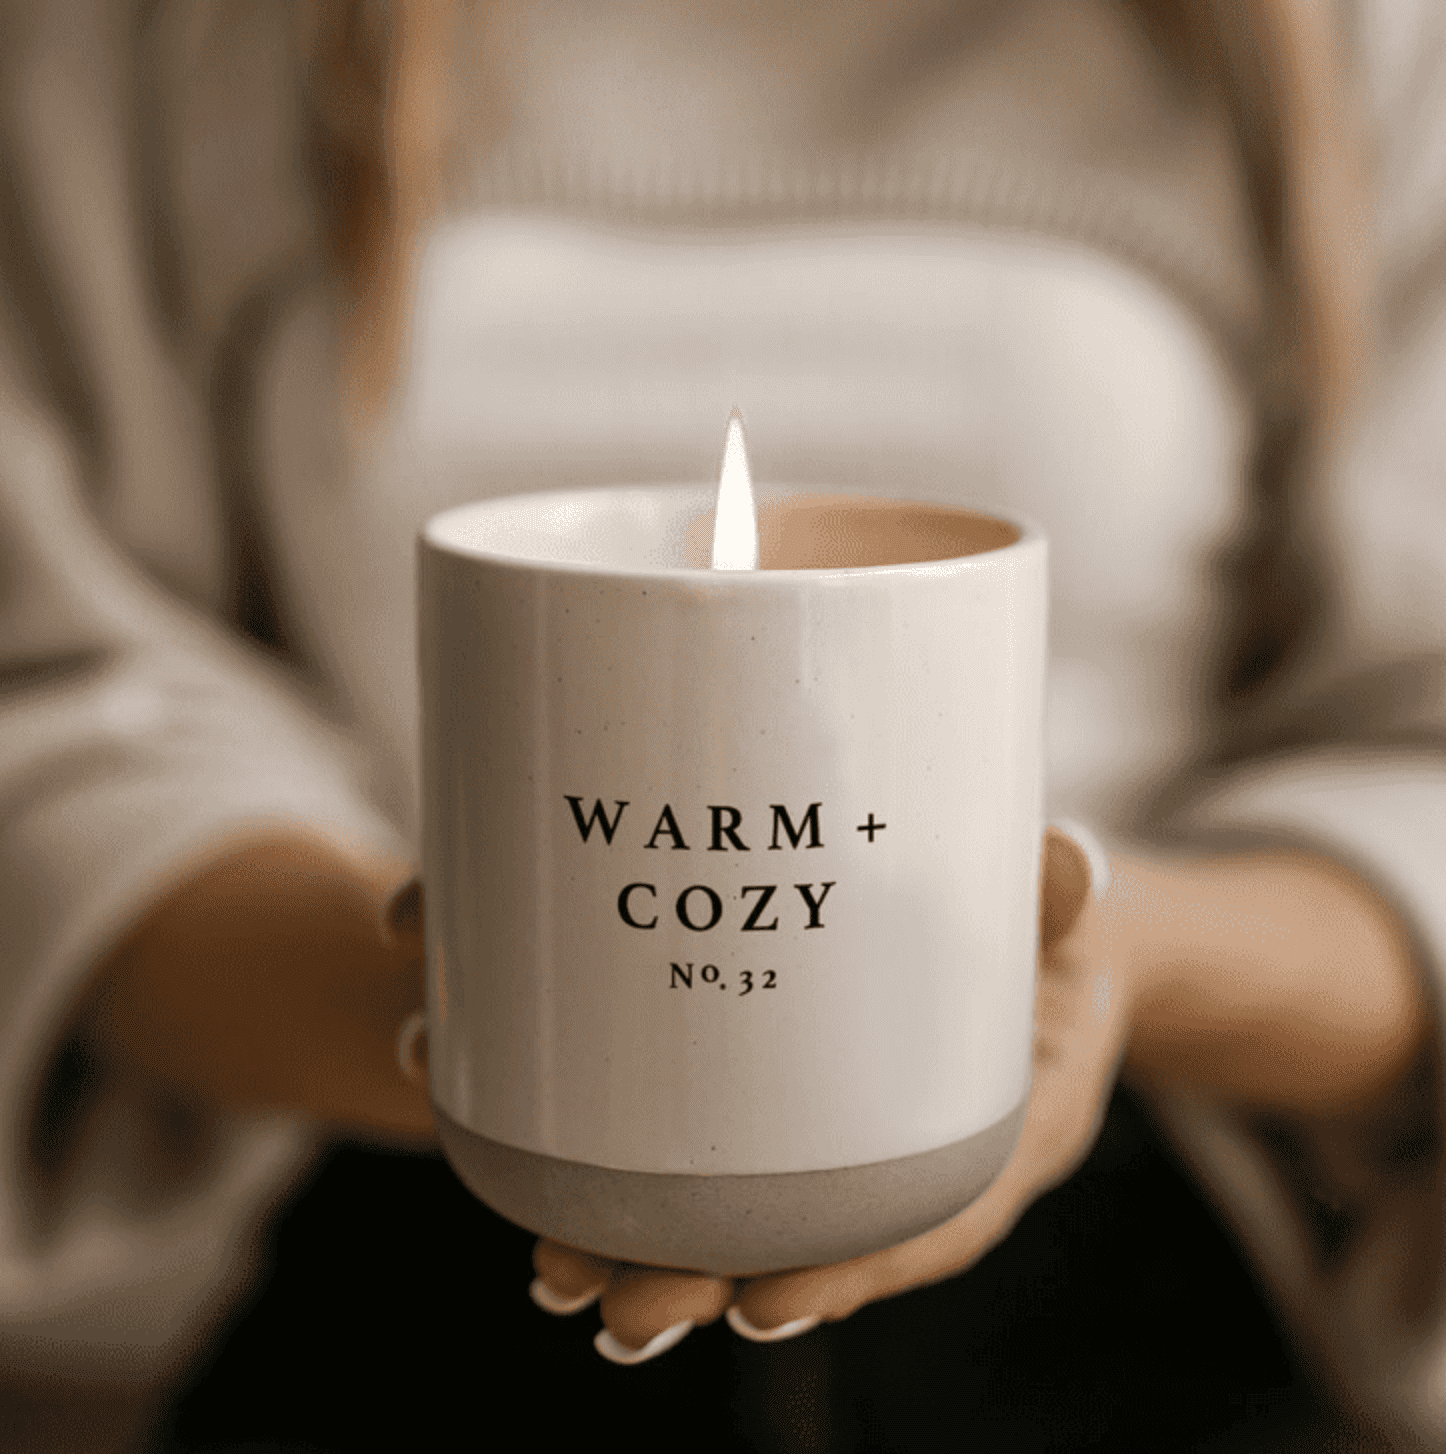 Enriched with hints of pine, orange, cinnamon, cypress, and fir, this candle is an ideal companion for autumn, evoking a truly comforting ambiance.